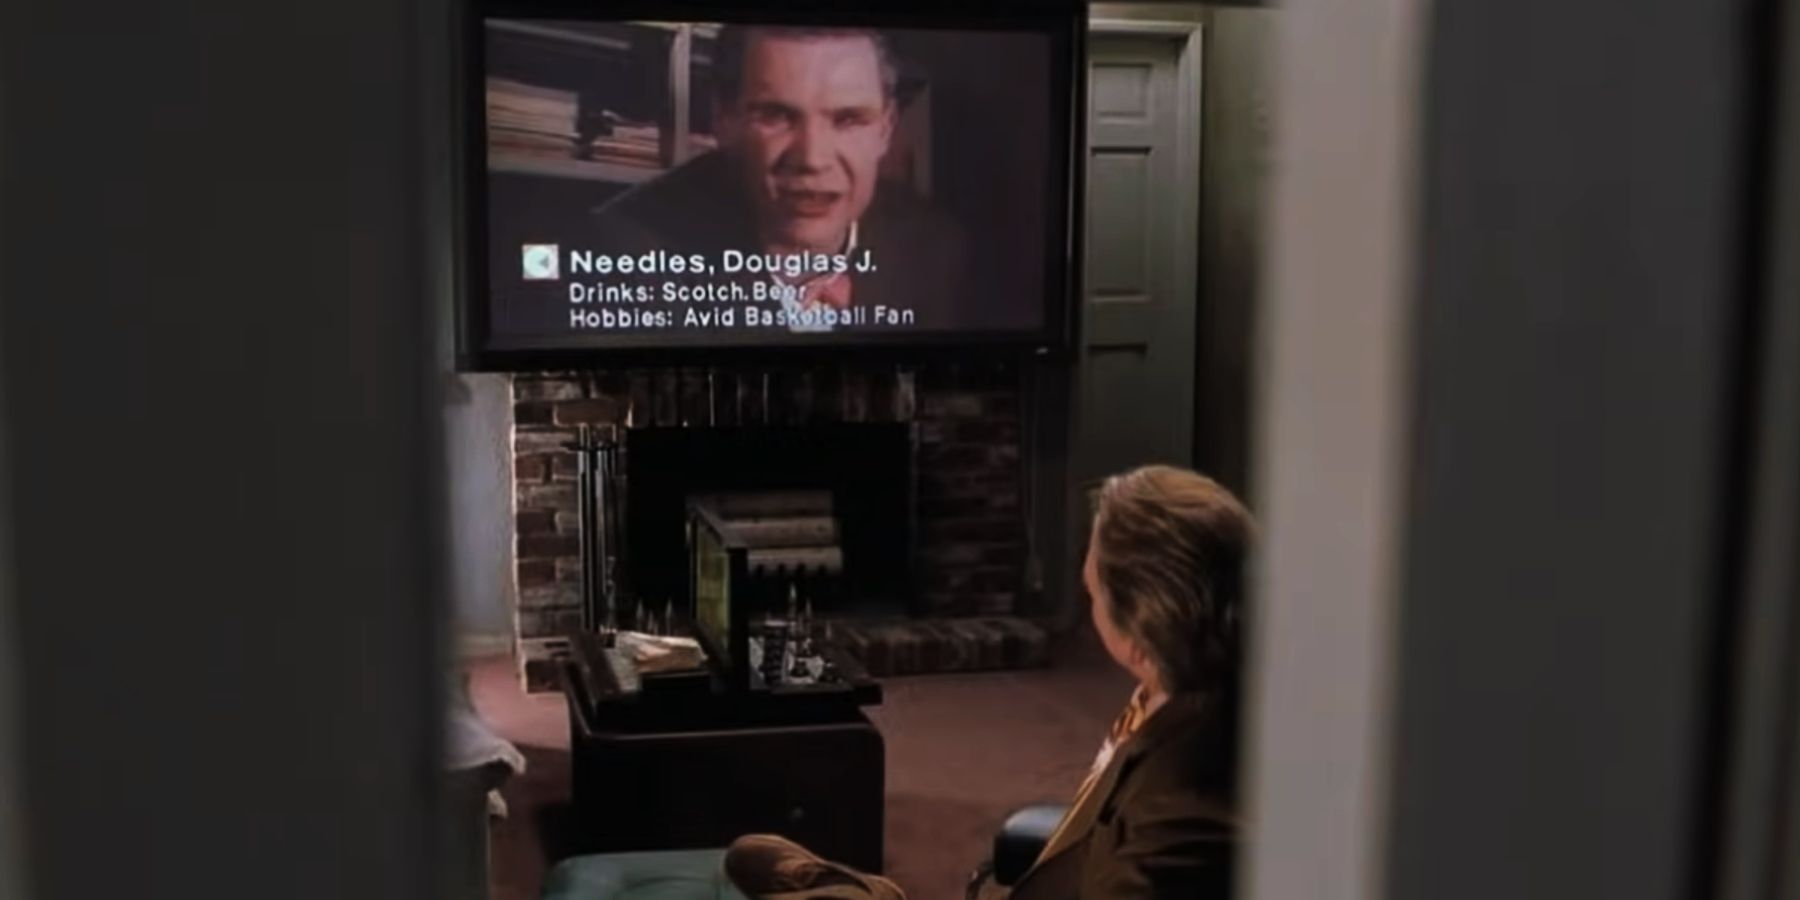 Marty calls Douglas J Needles on video call in Back to the Future 2